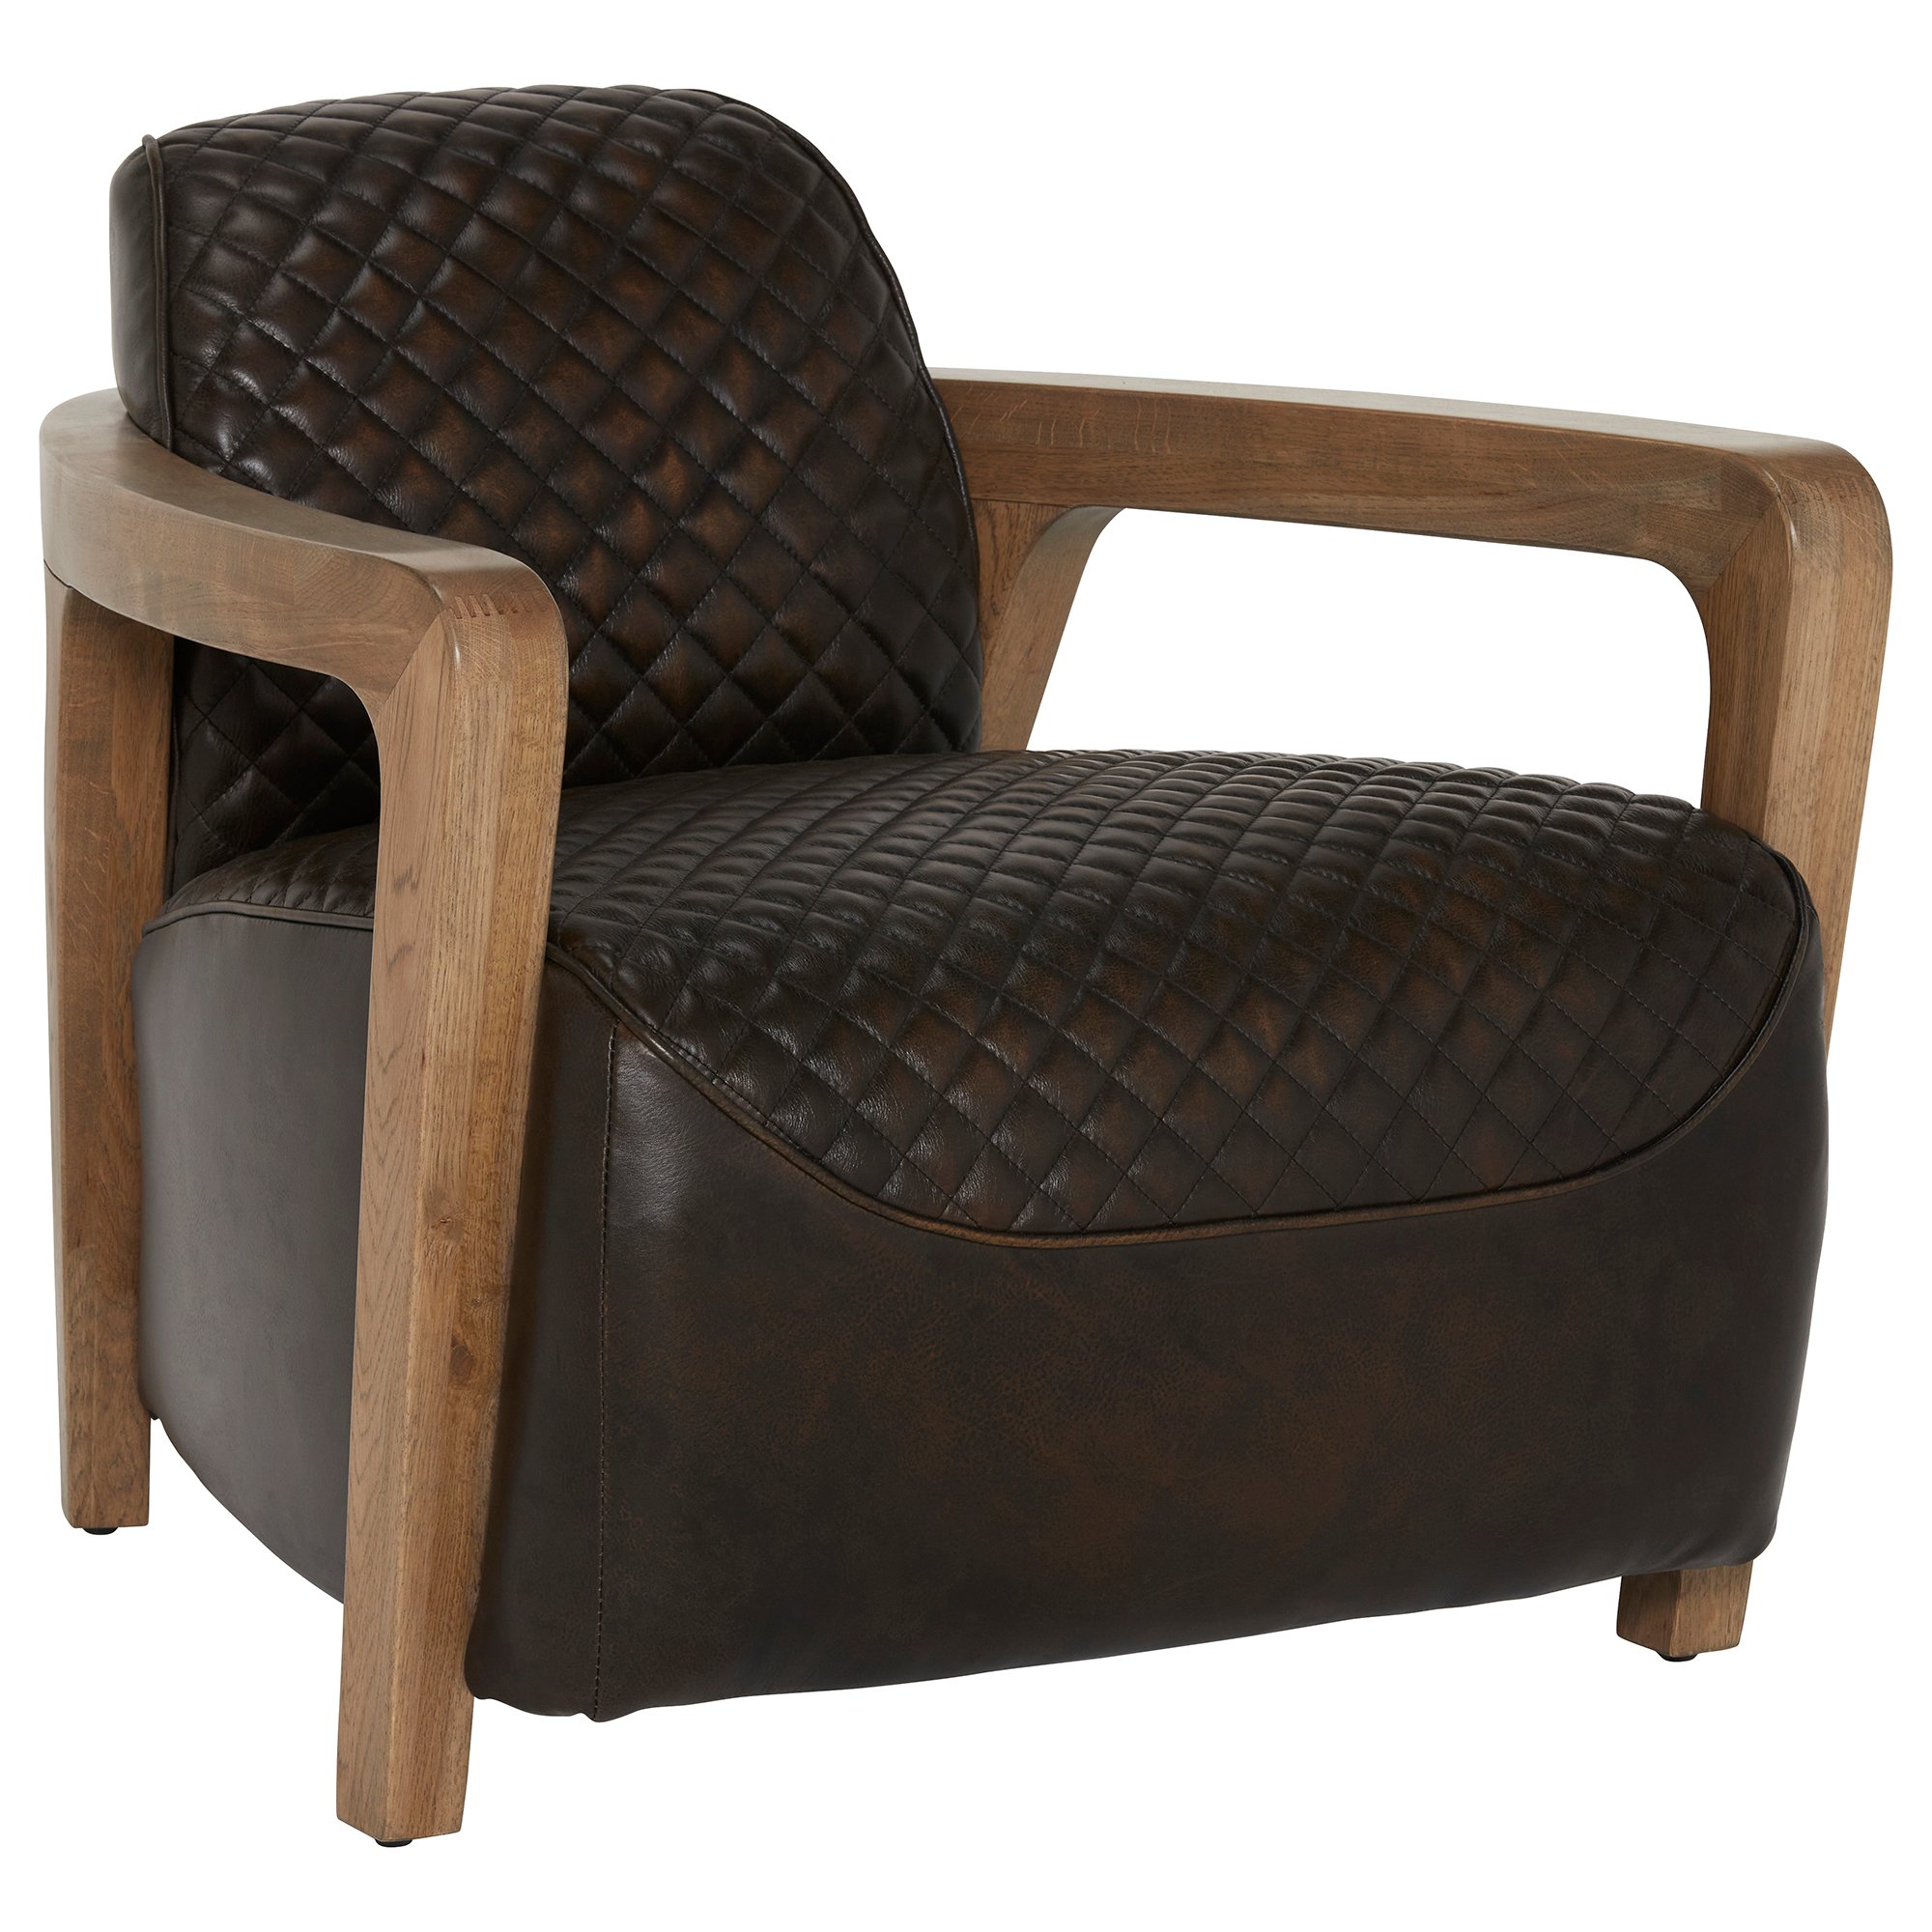 Timothy Oulton Wildcat Armchair, Brown | Barker & Stonehouse